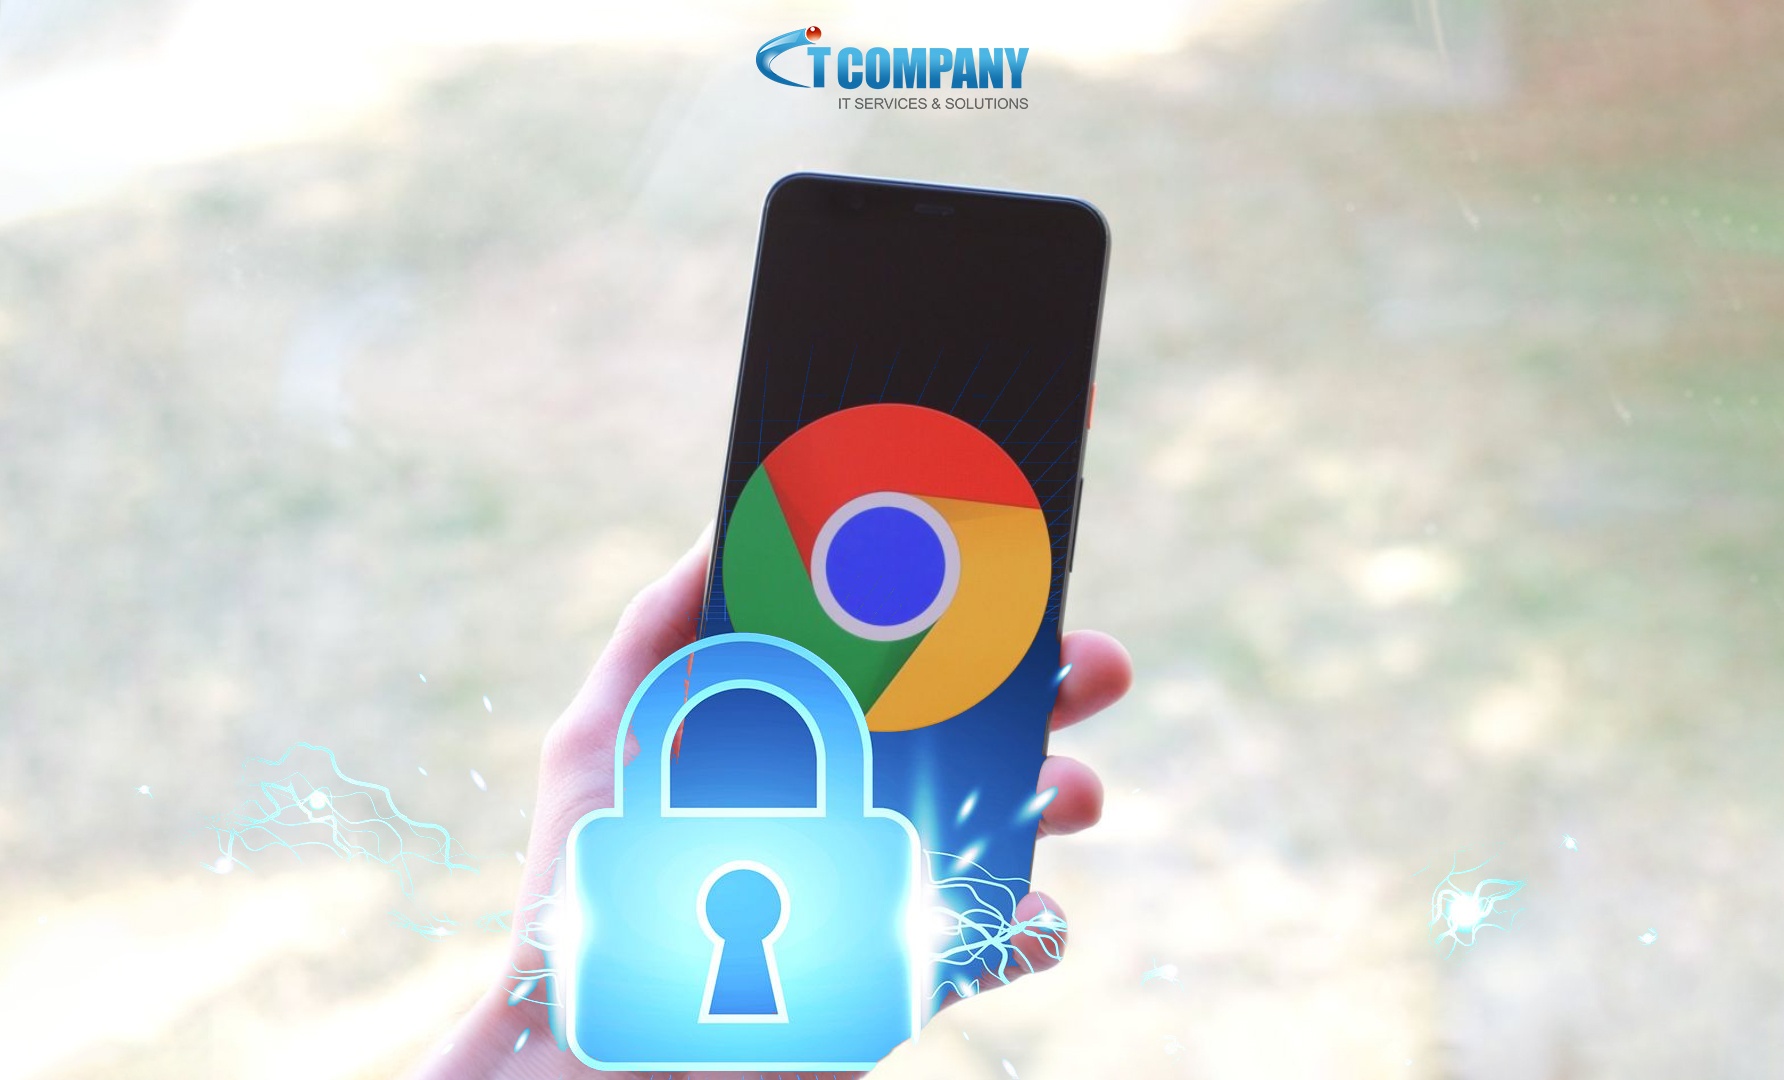 Dangerous Google Chrome extensions were installed on over a million devices